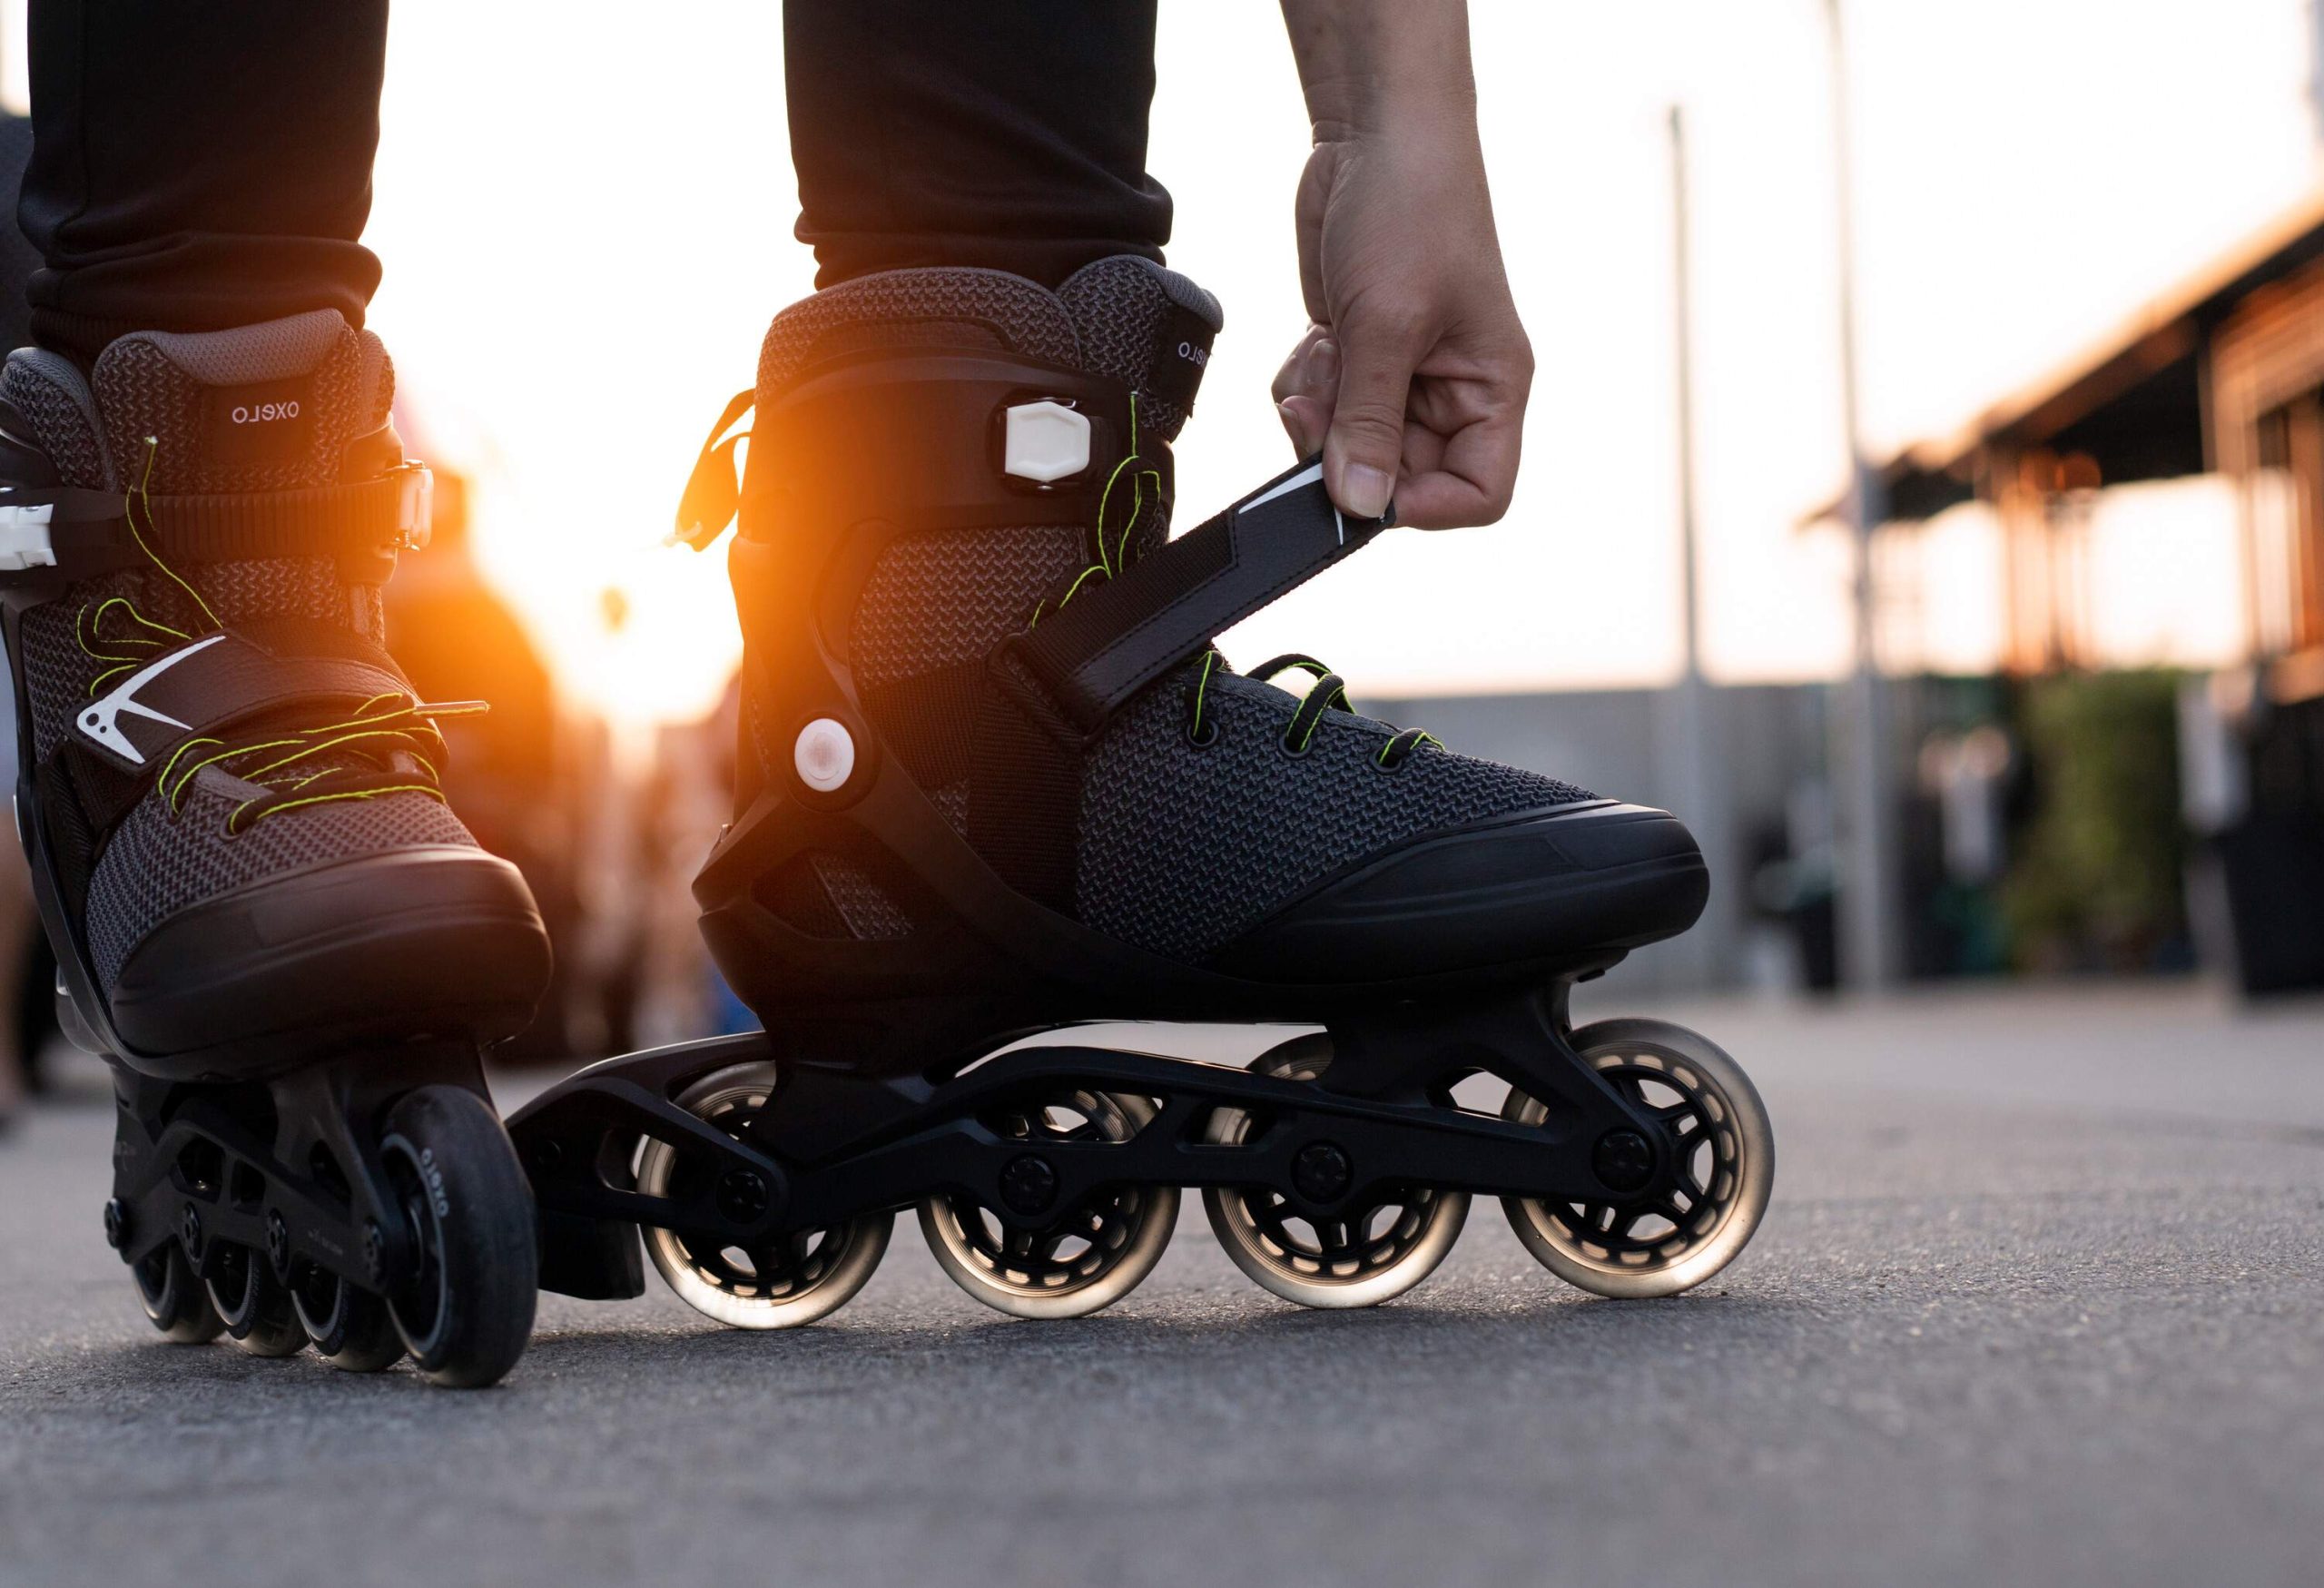 A hand fixes a roller blade's strap against the backdrop of a sunset.